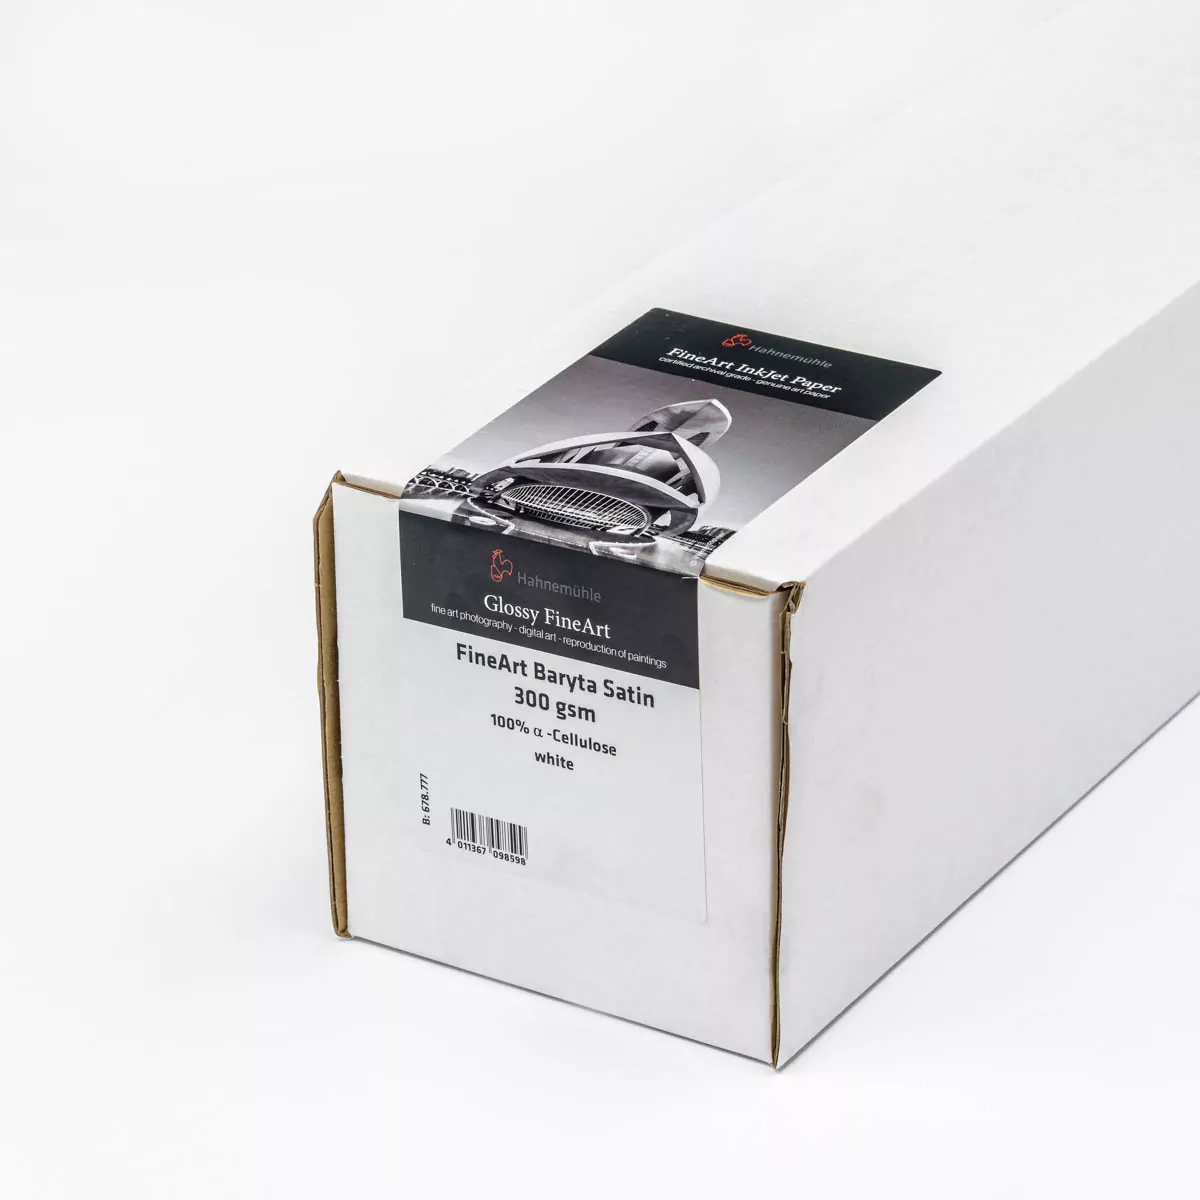 Hahnemuhle FineArt Baryta Satin 300gsm 36"(91cm)x12m roll